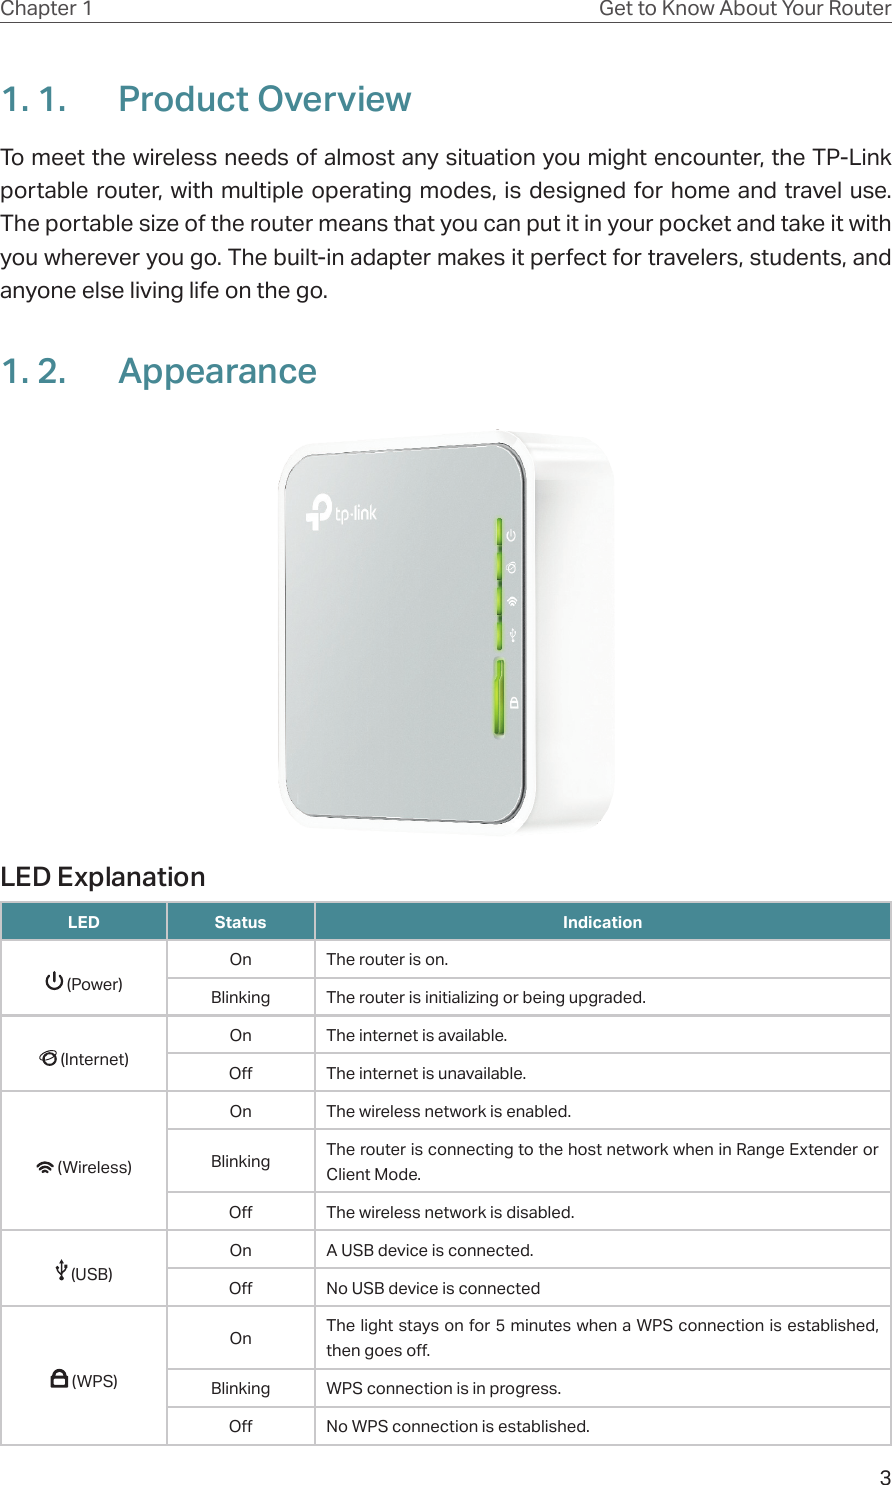 3Chapter 1 Get to Know About Your Router1. 1.  Product OverviewTo meet the wireless needs of almost any situation you might encounter, the TP-Link portable router, with multiple operating modes, is designed for home and travel use. The portable size of the router means that you can put it in your pocket and take it with you wherever you go. The built-in adapter makes it perfect for travelers, students, and anyone else living life on the go.1. 2.  AppearanceLED ExplanationLED Status Indication (Power)On The router is on.Blinking The router is initializing or being upgraded. (Internet)On The internet is available.Off The internet is unavailable. (Wireless)On The wireless network is enabled.Blinking The router is connecting to the host network when in Range Extender or Client Mode.Off The wireless network is disabled. (USB)On A USB device is connected.Off No USB device is connected (WPS)On The light stays on for 5 minutes when a WPS connection is established, then goes off.Blinking WPS connection is in progress.Off No WPS connection is established.